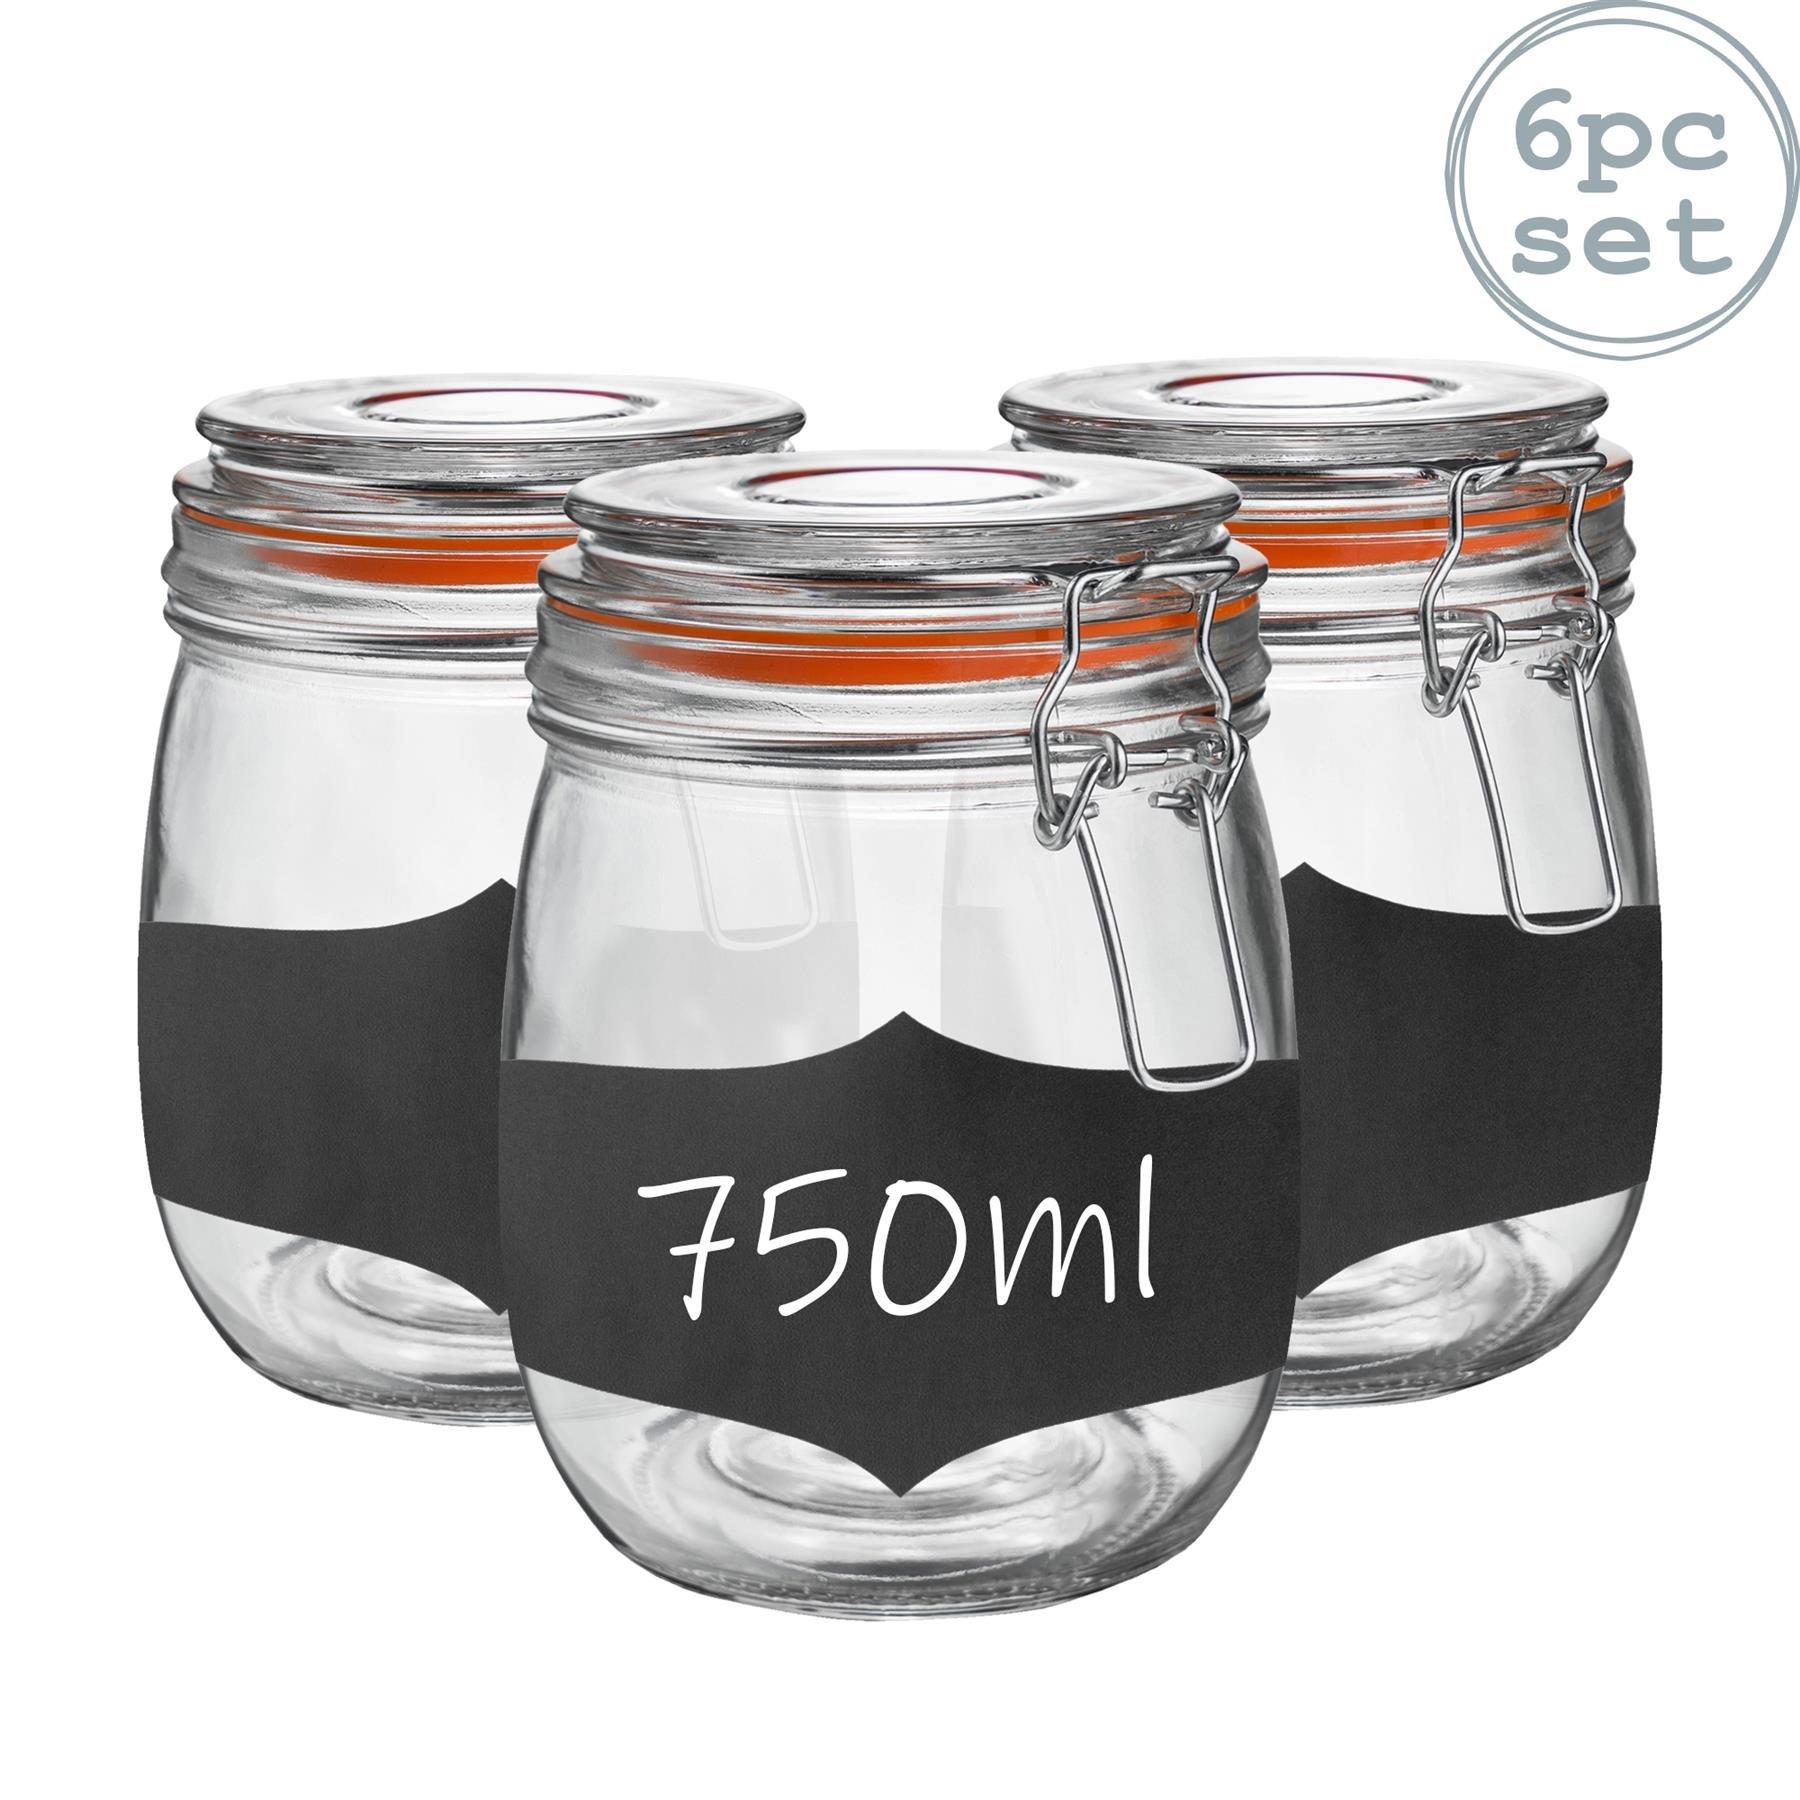 750ml Preserving Jar with Airtight Clip Lid and Chalkboard Stickers 